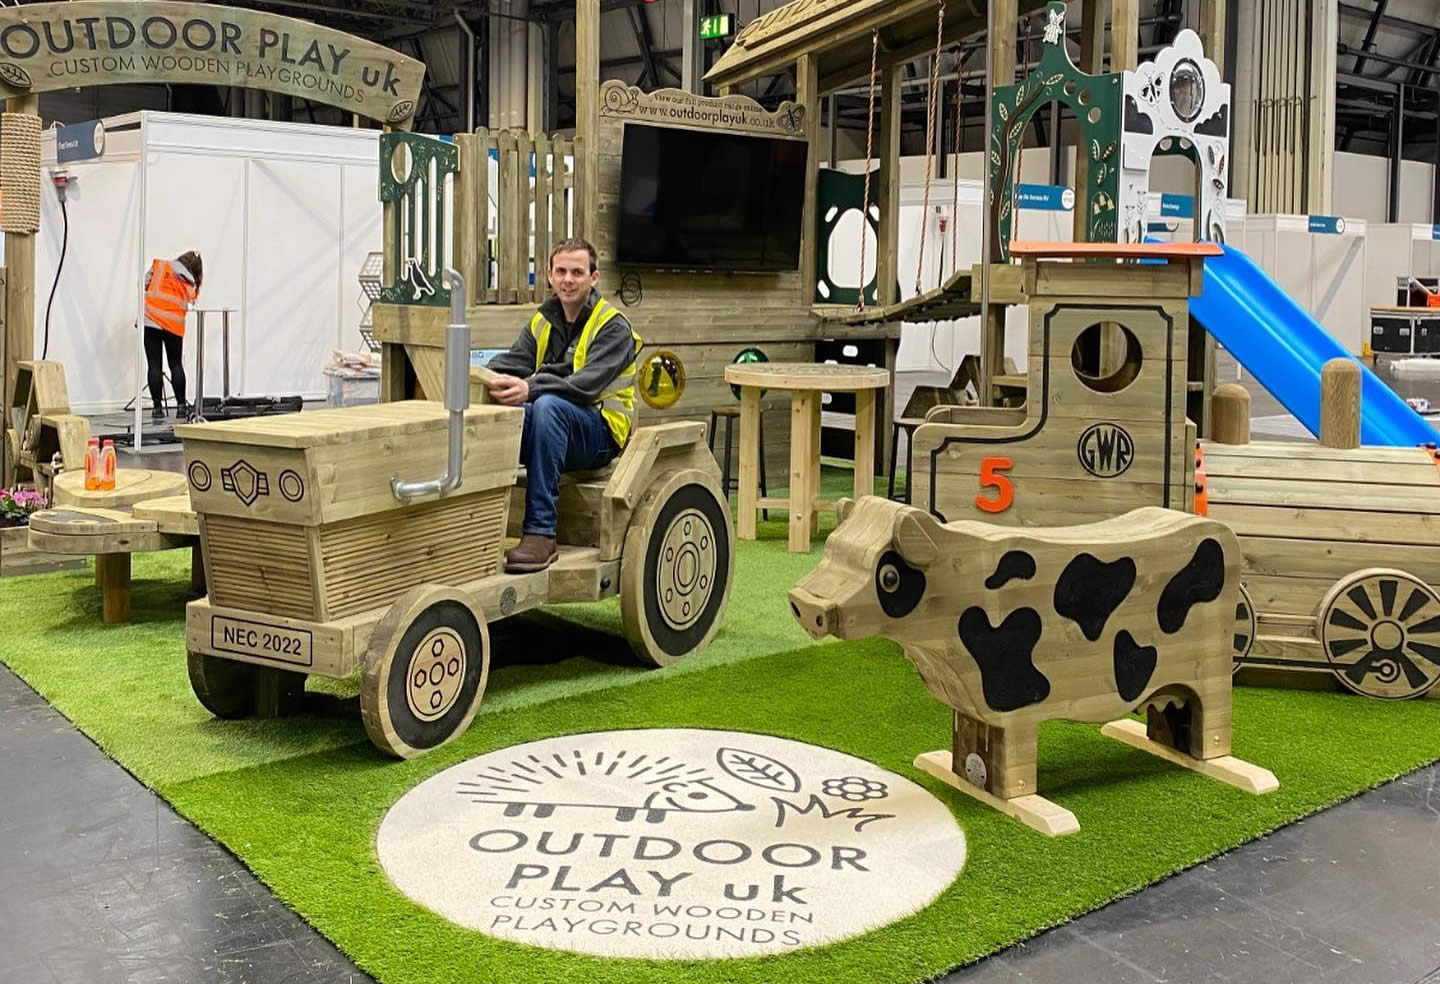 Outdoor Play UK exhibit at the NEC Holiday Park Resort 2022 Show